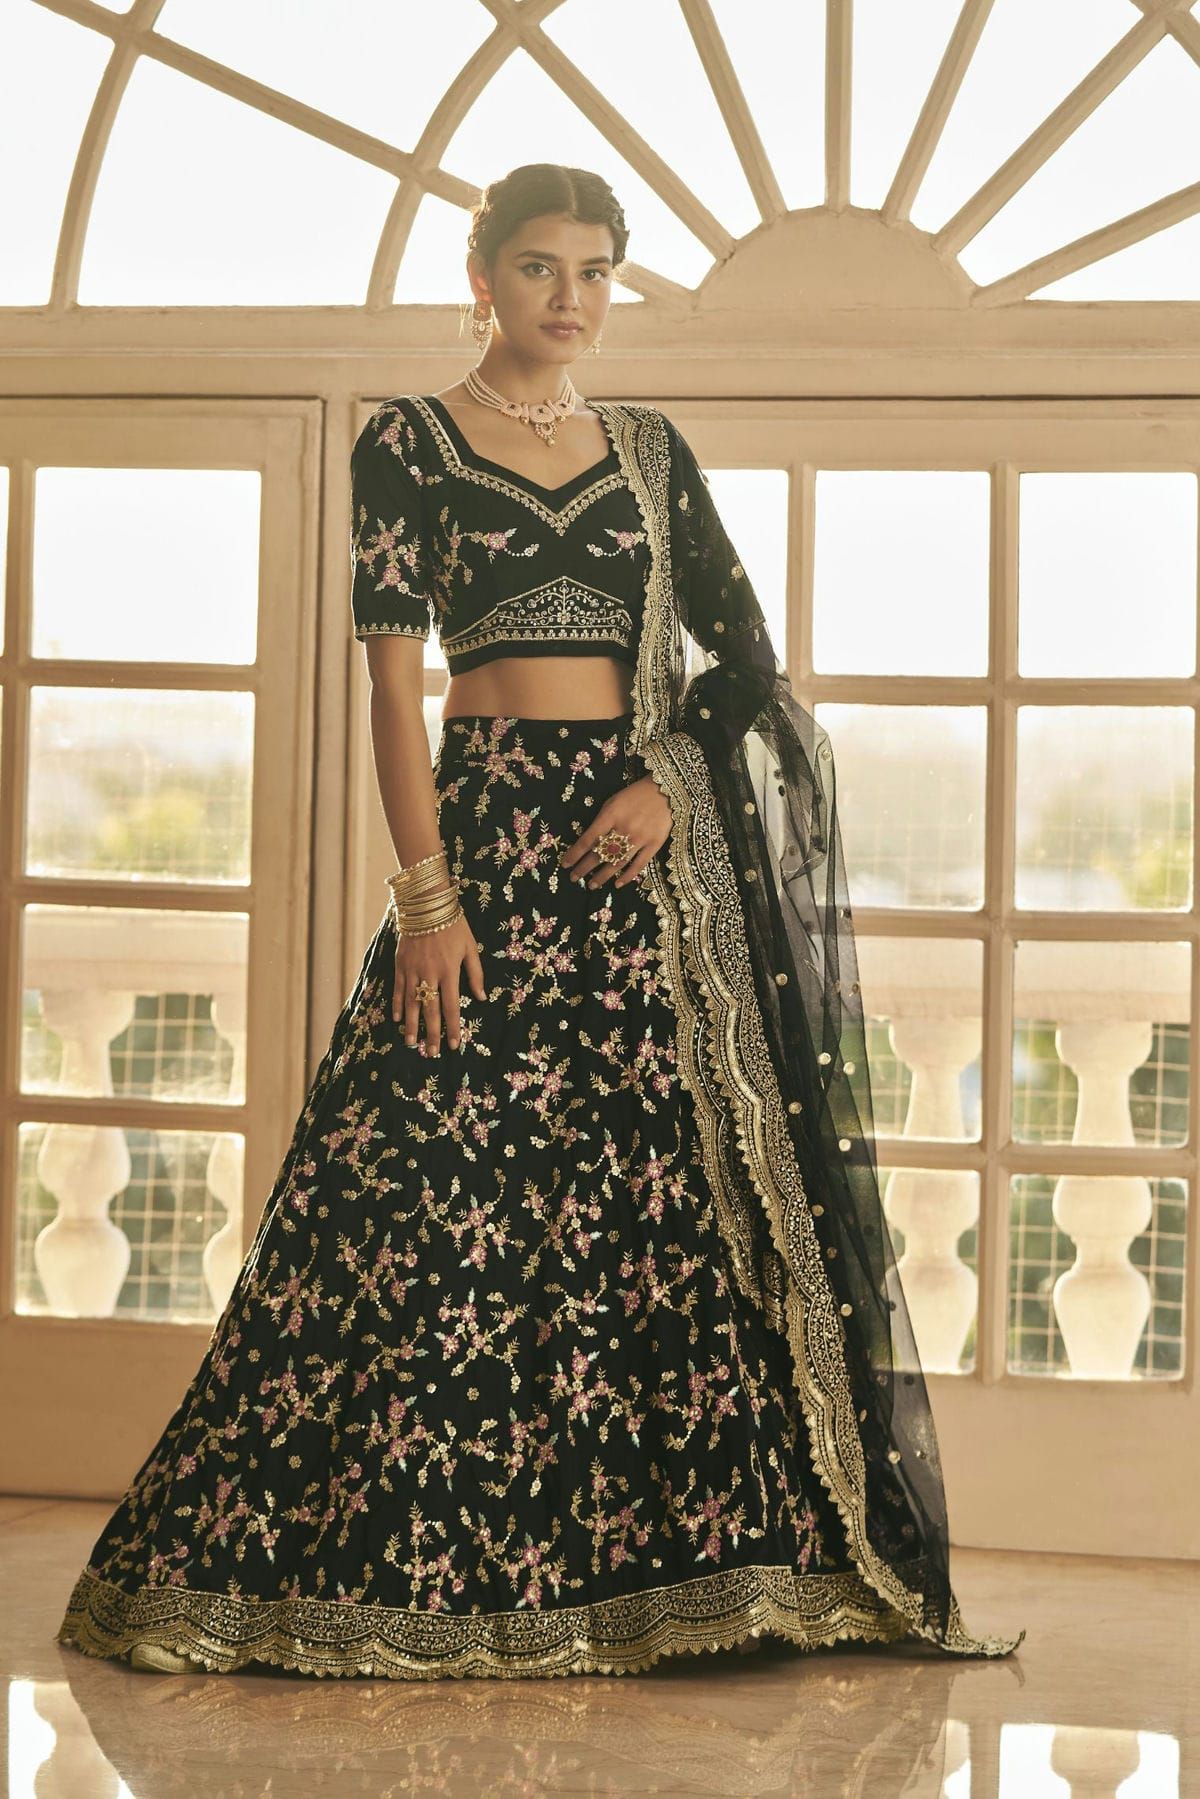 Ninecolours.com - Maroon Colour Pure Velvet Fabric Party Wear Lehenga Choli  Comes With Matching Blouse. This Lehenga Choli Is Crafted With  Embroidery,Zari Work. This Lehenga Choli Comes With Unstitched Blouse Which  Can